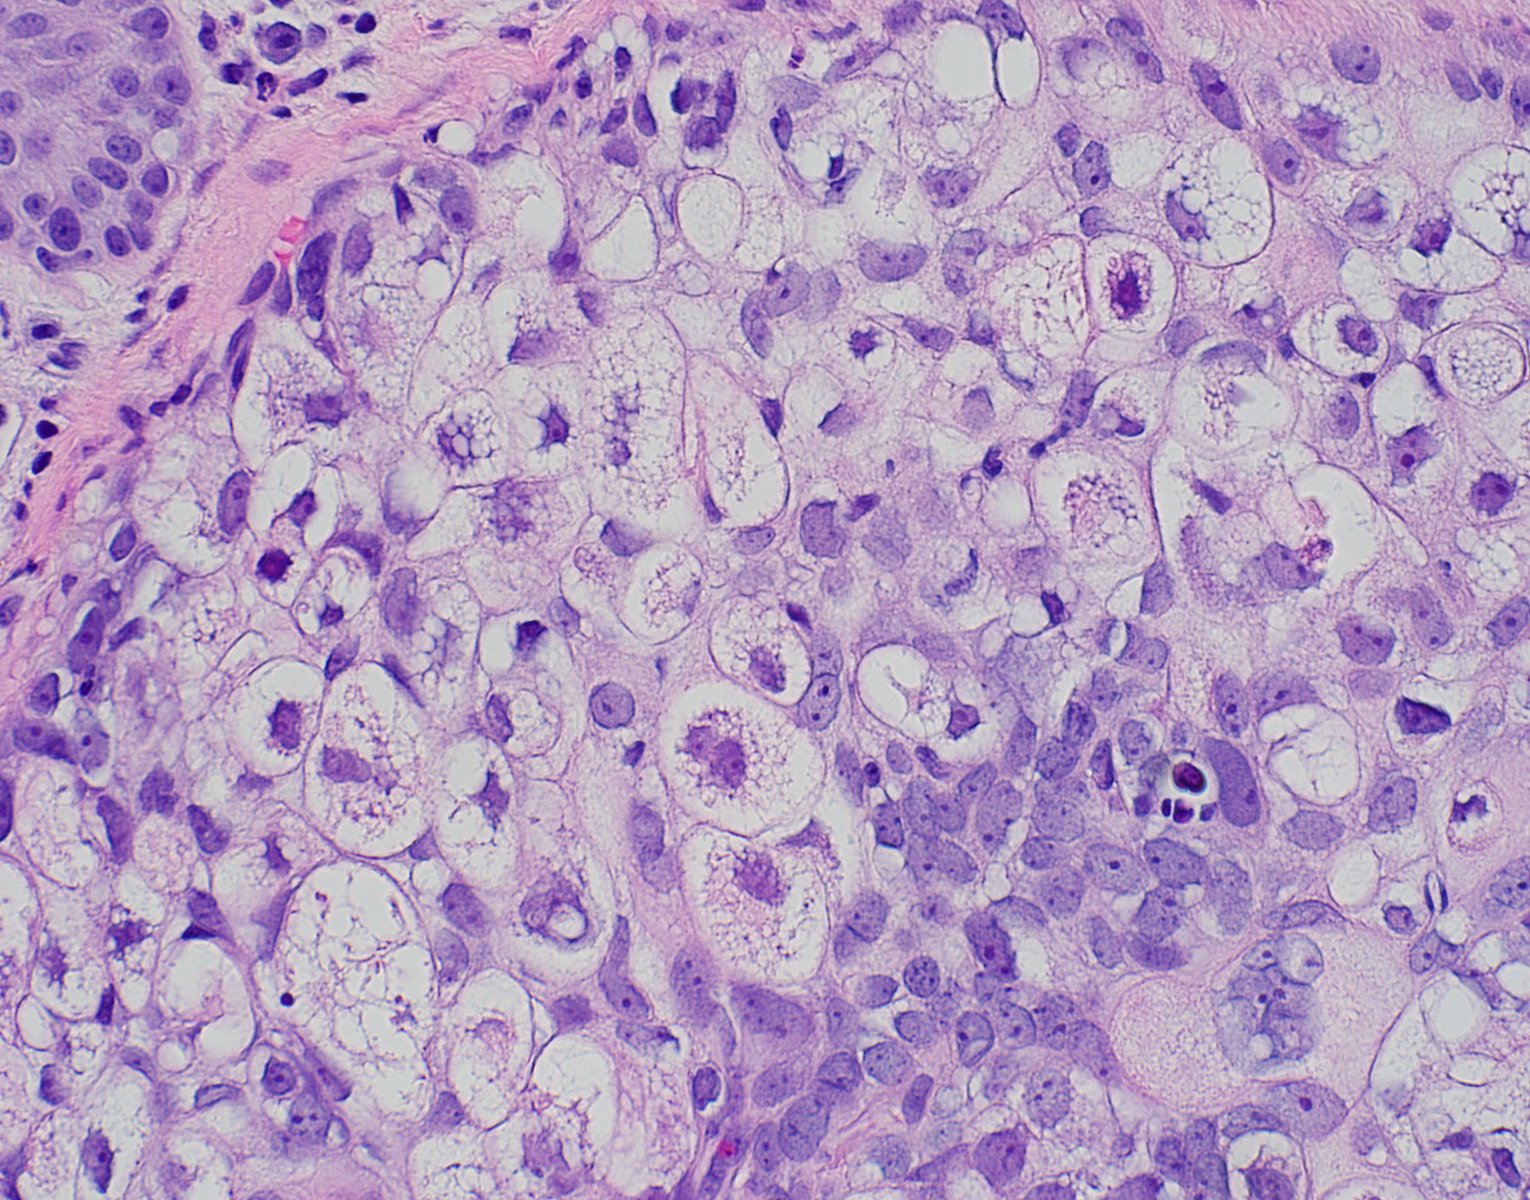 Multivacuolated cells